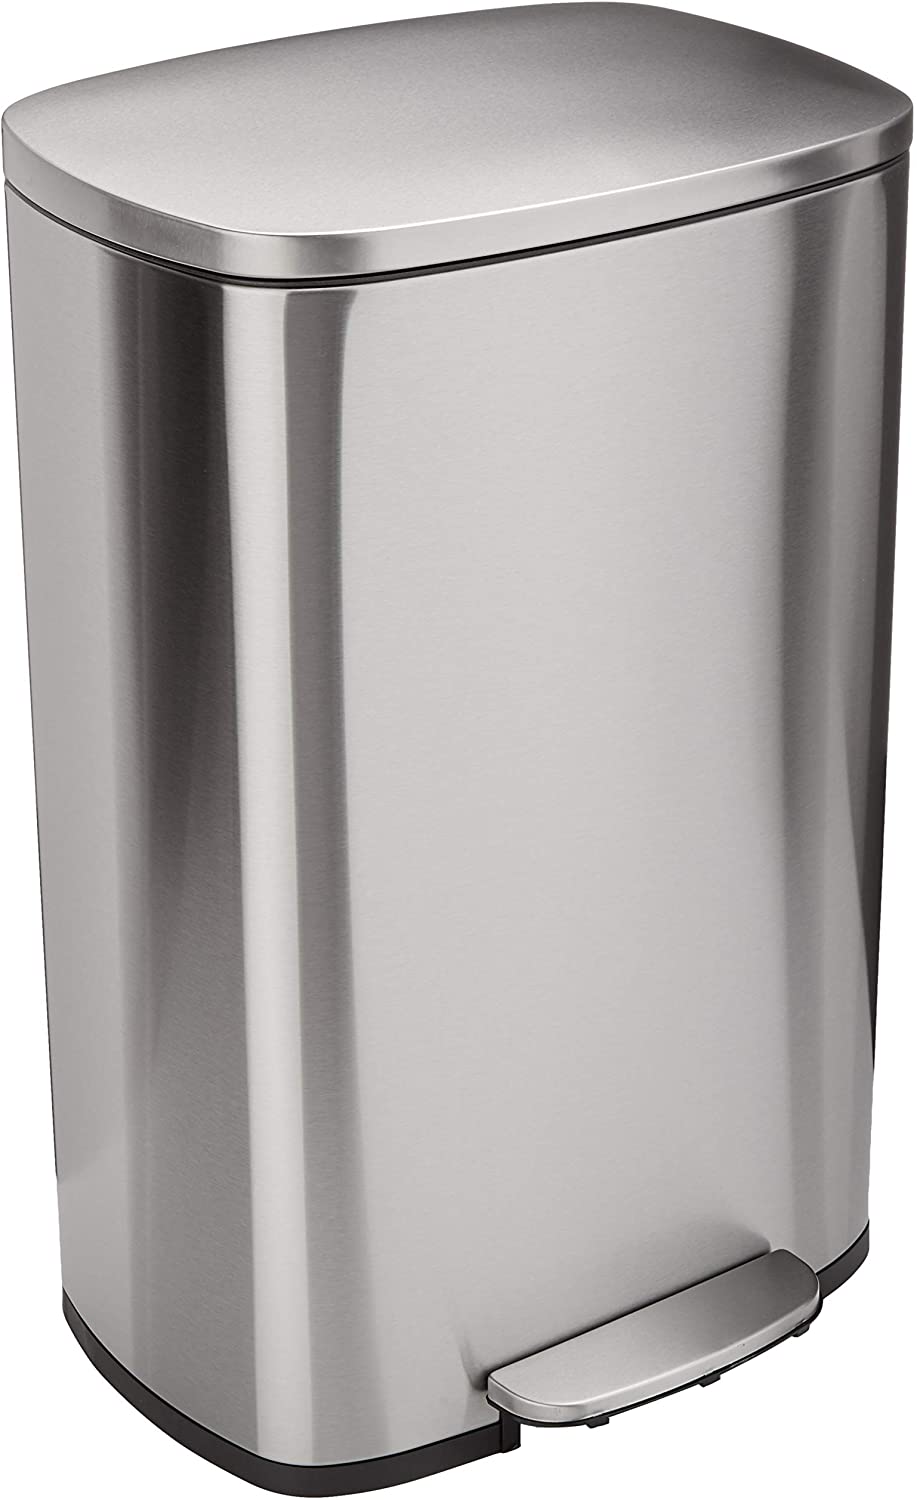 AmazonBasics Rectangle, Stainless Steel, Soft-Close, Step Trash Can, 50L, Satin Nickel